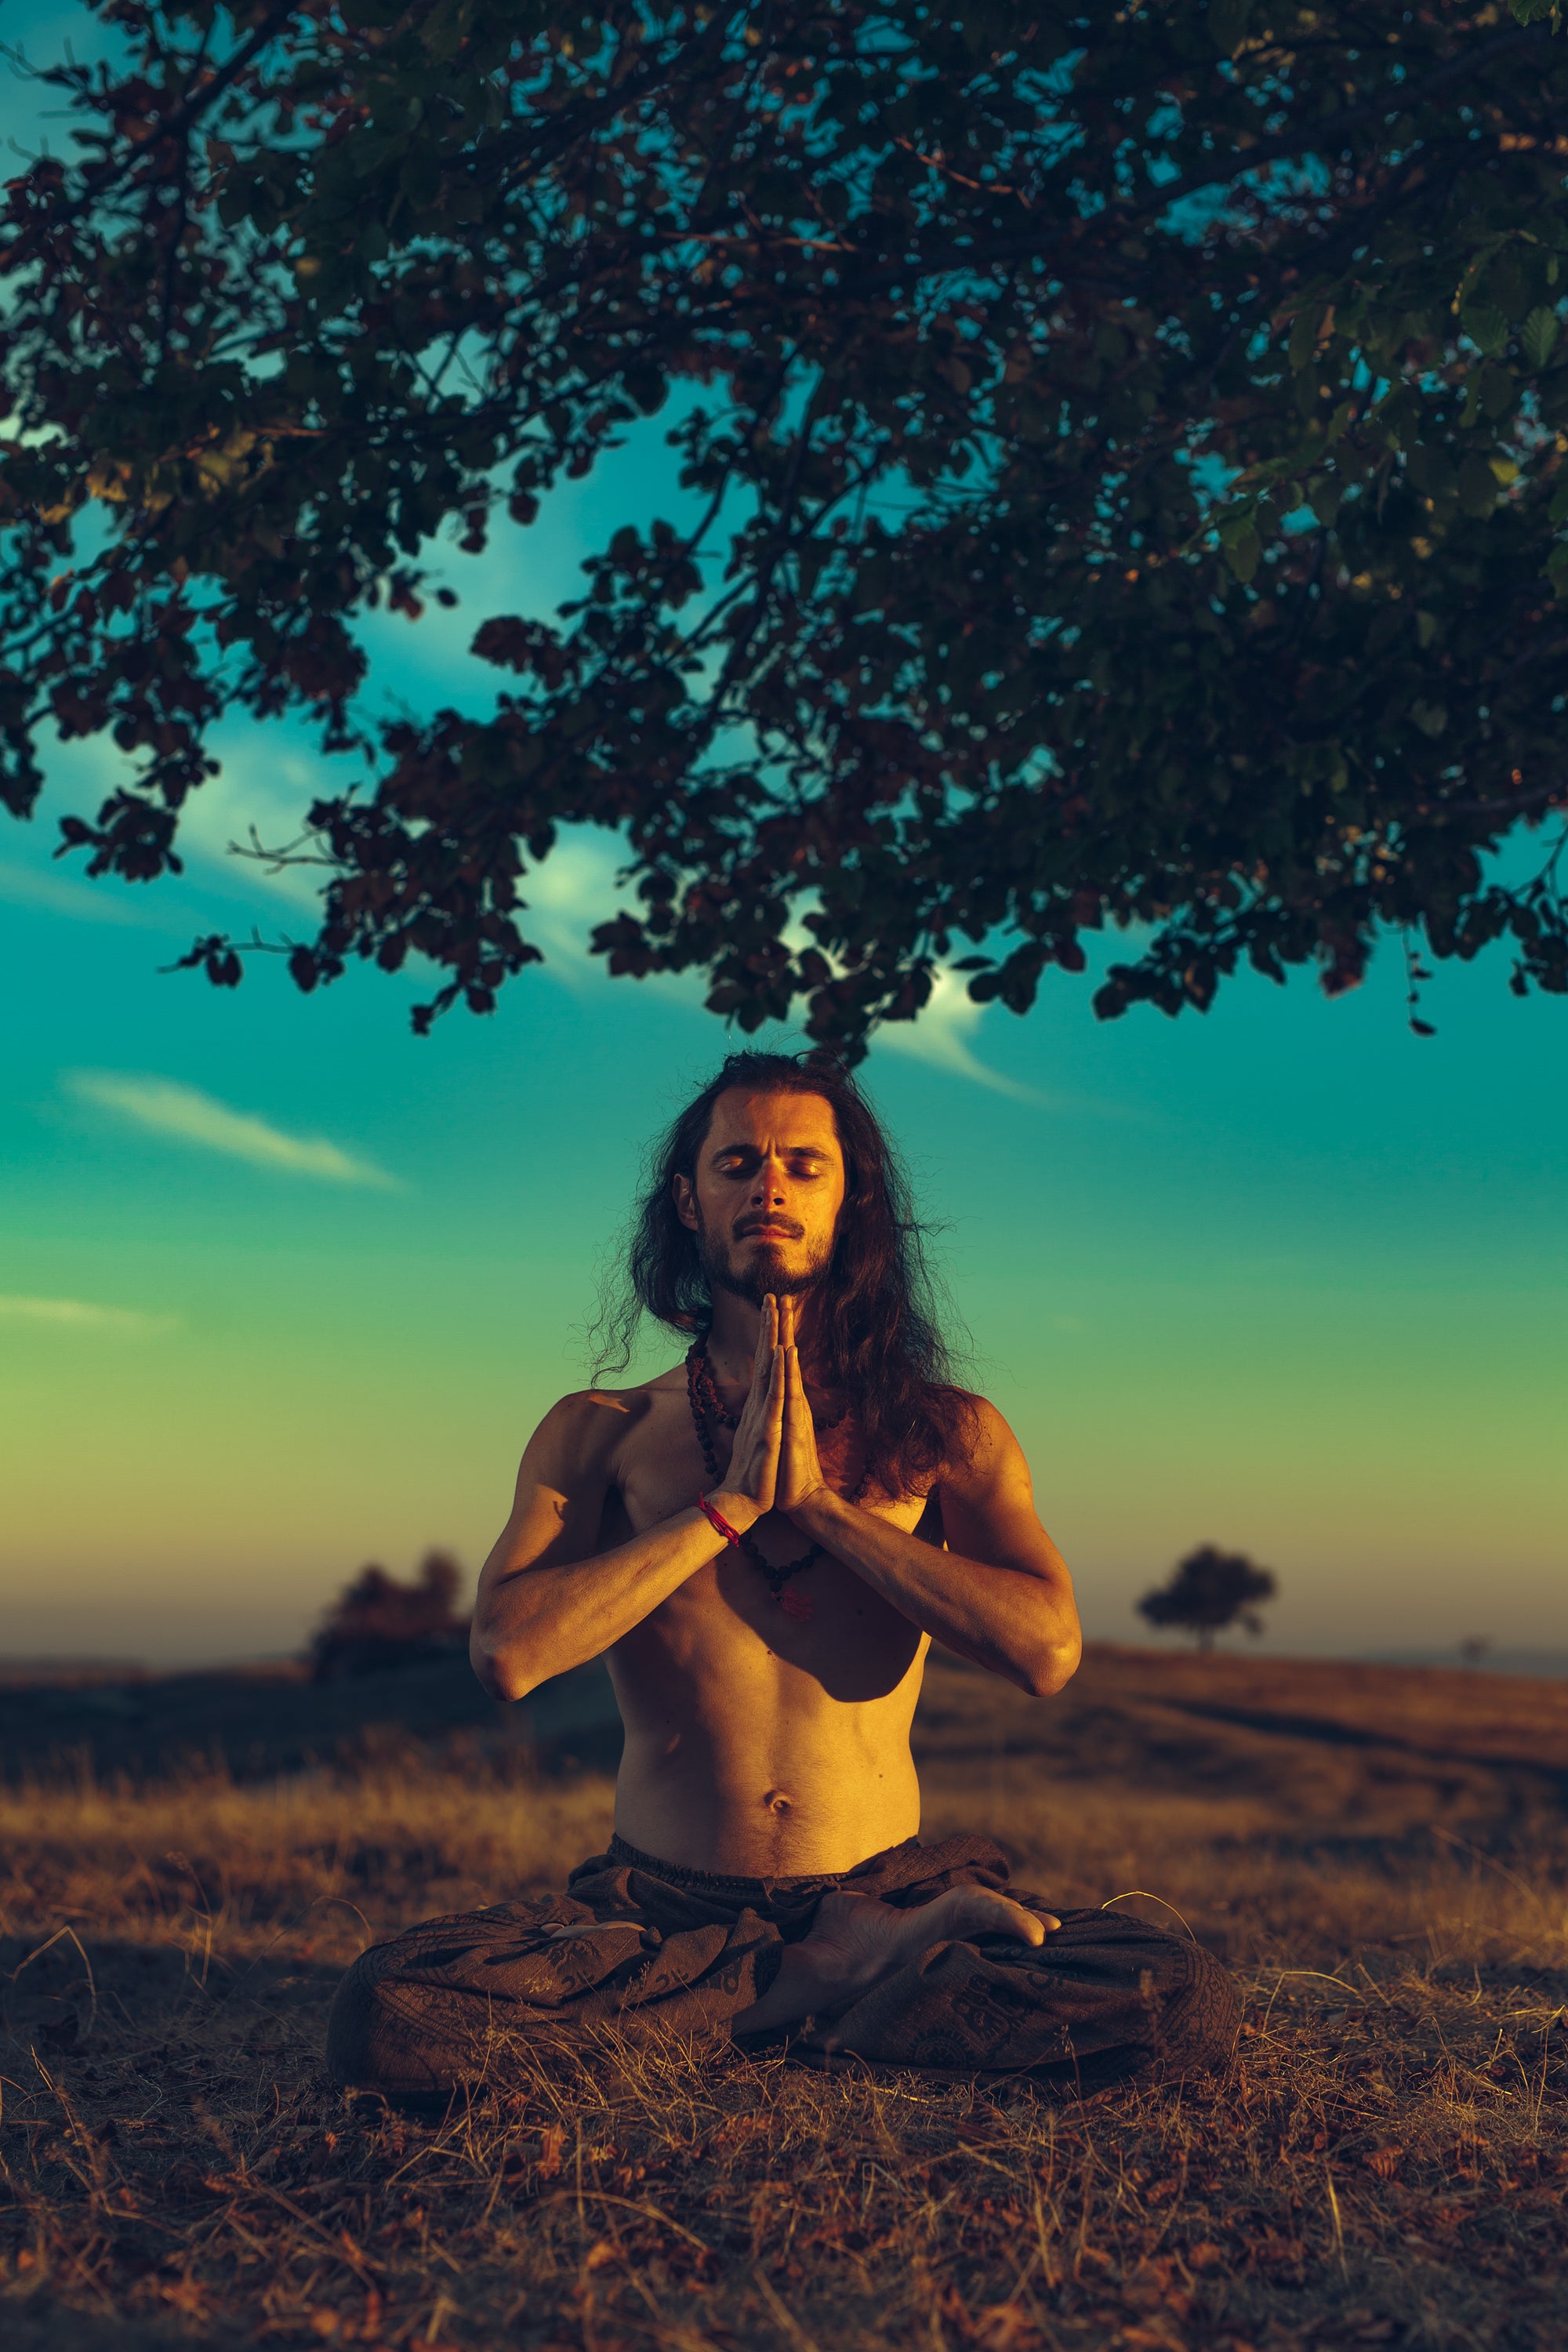 How to Increase Conscious Awareness and Transcend into Your Highest Self